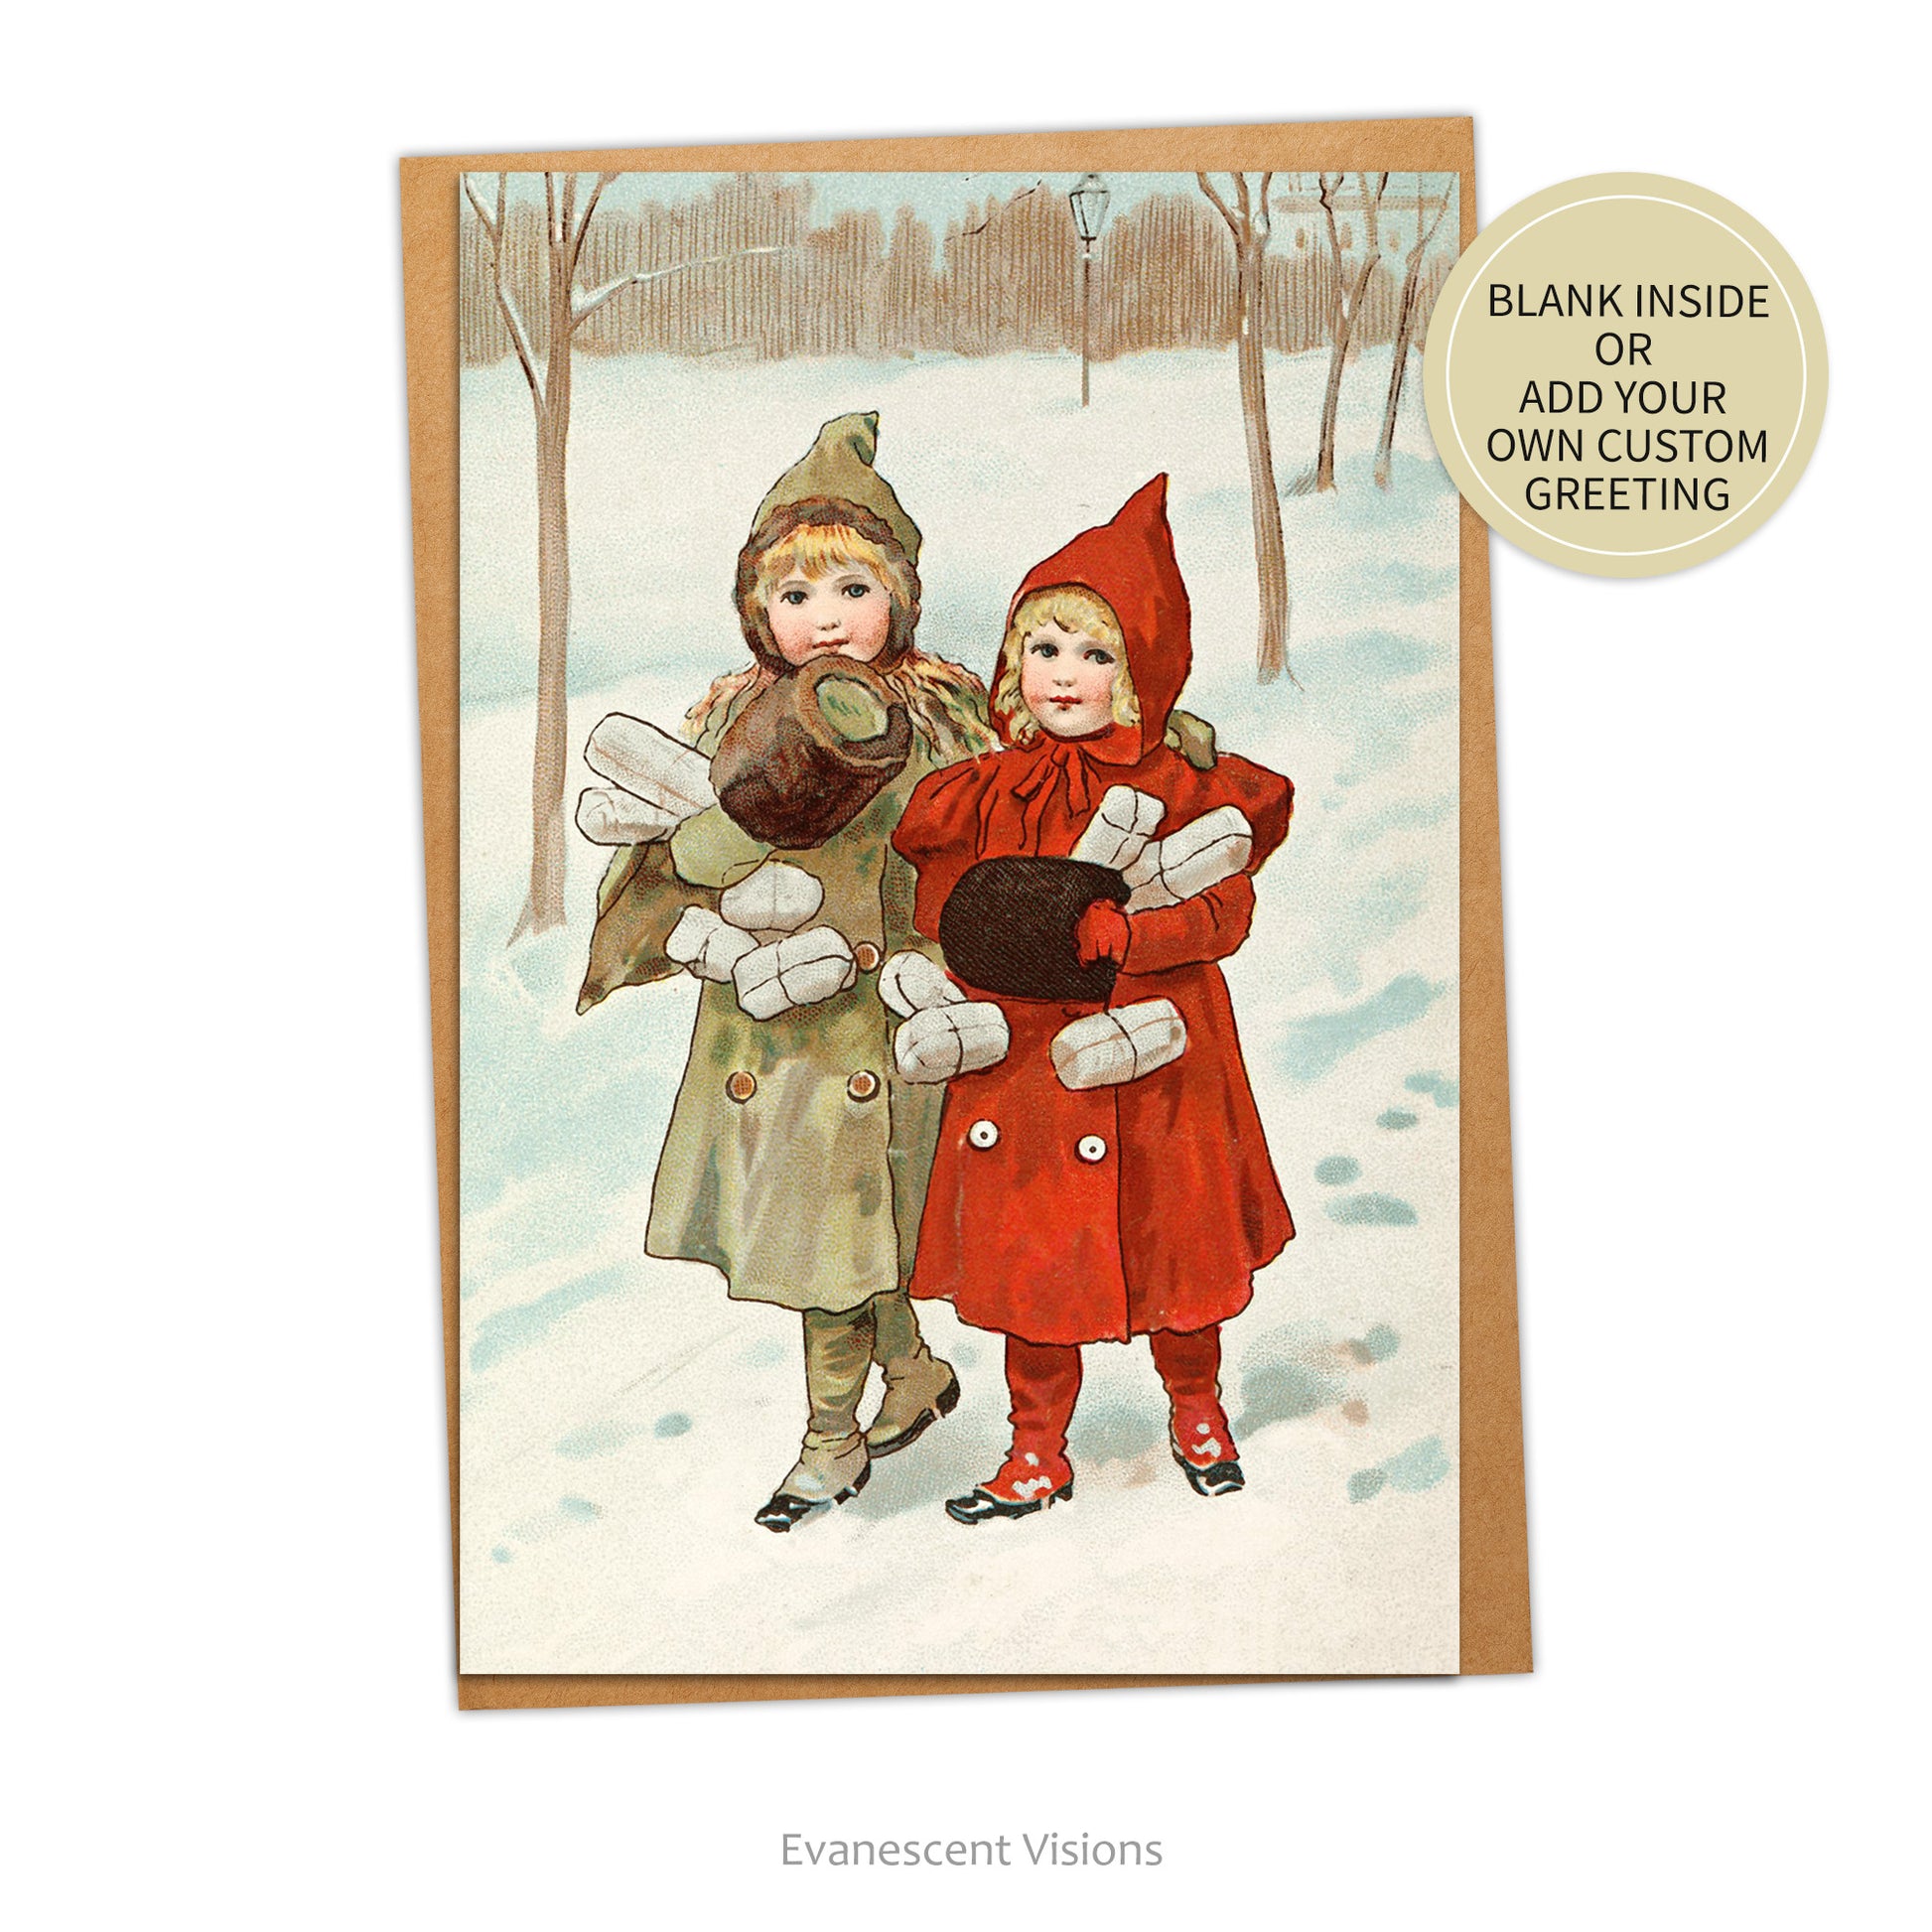 Card with vintage image of two little girls walking in the snow with lots of Christmas presents in their arms, and envelope. Sticker indicates that card may be ordered blank inside or with custom greeting